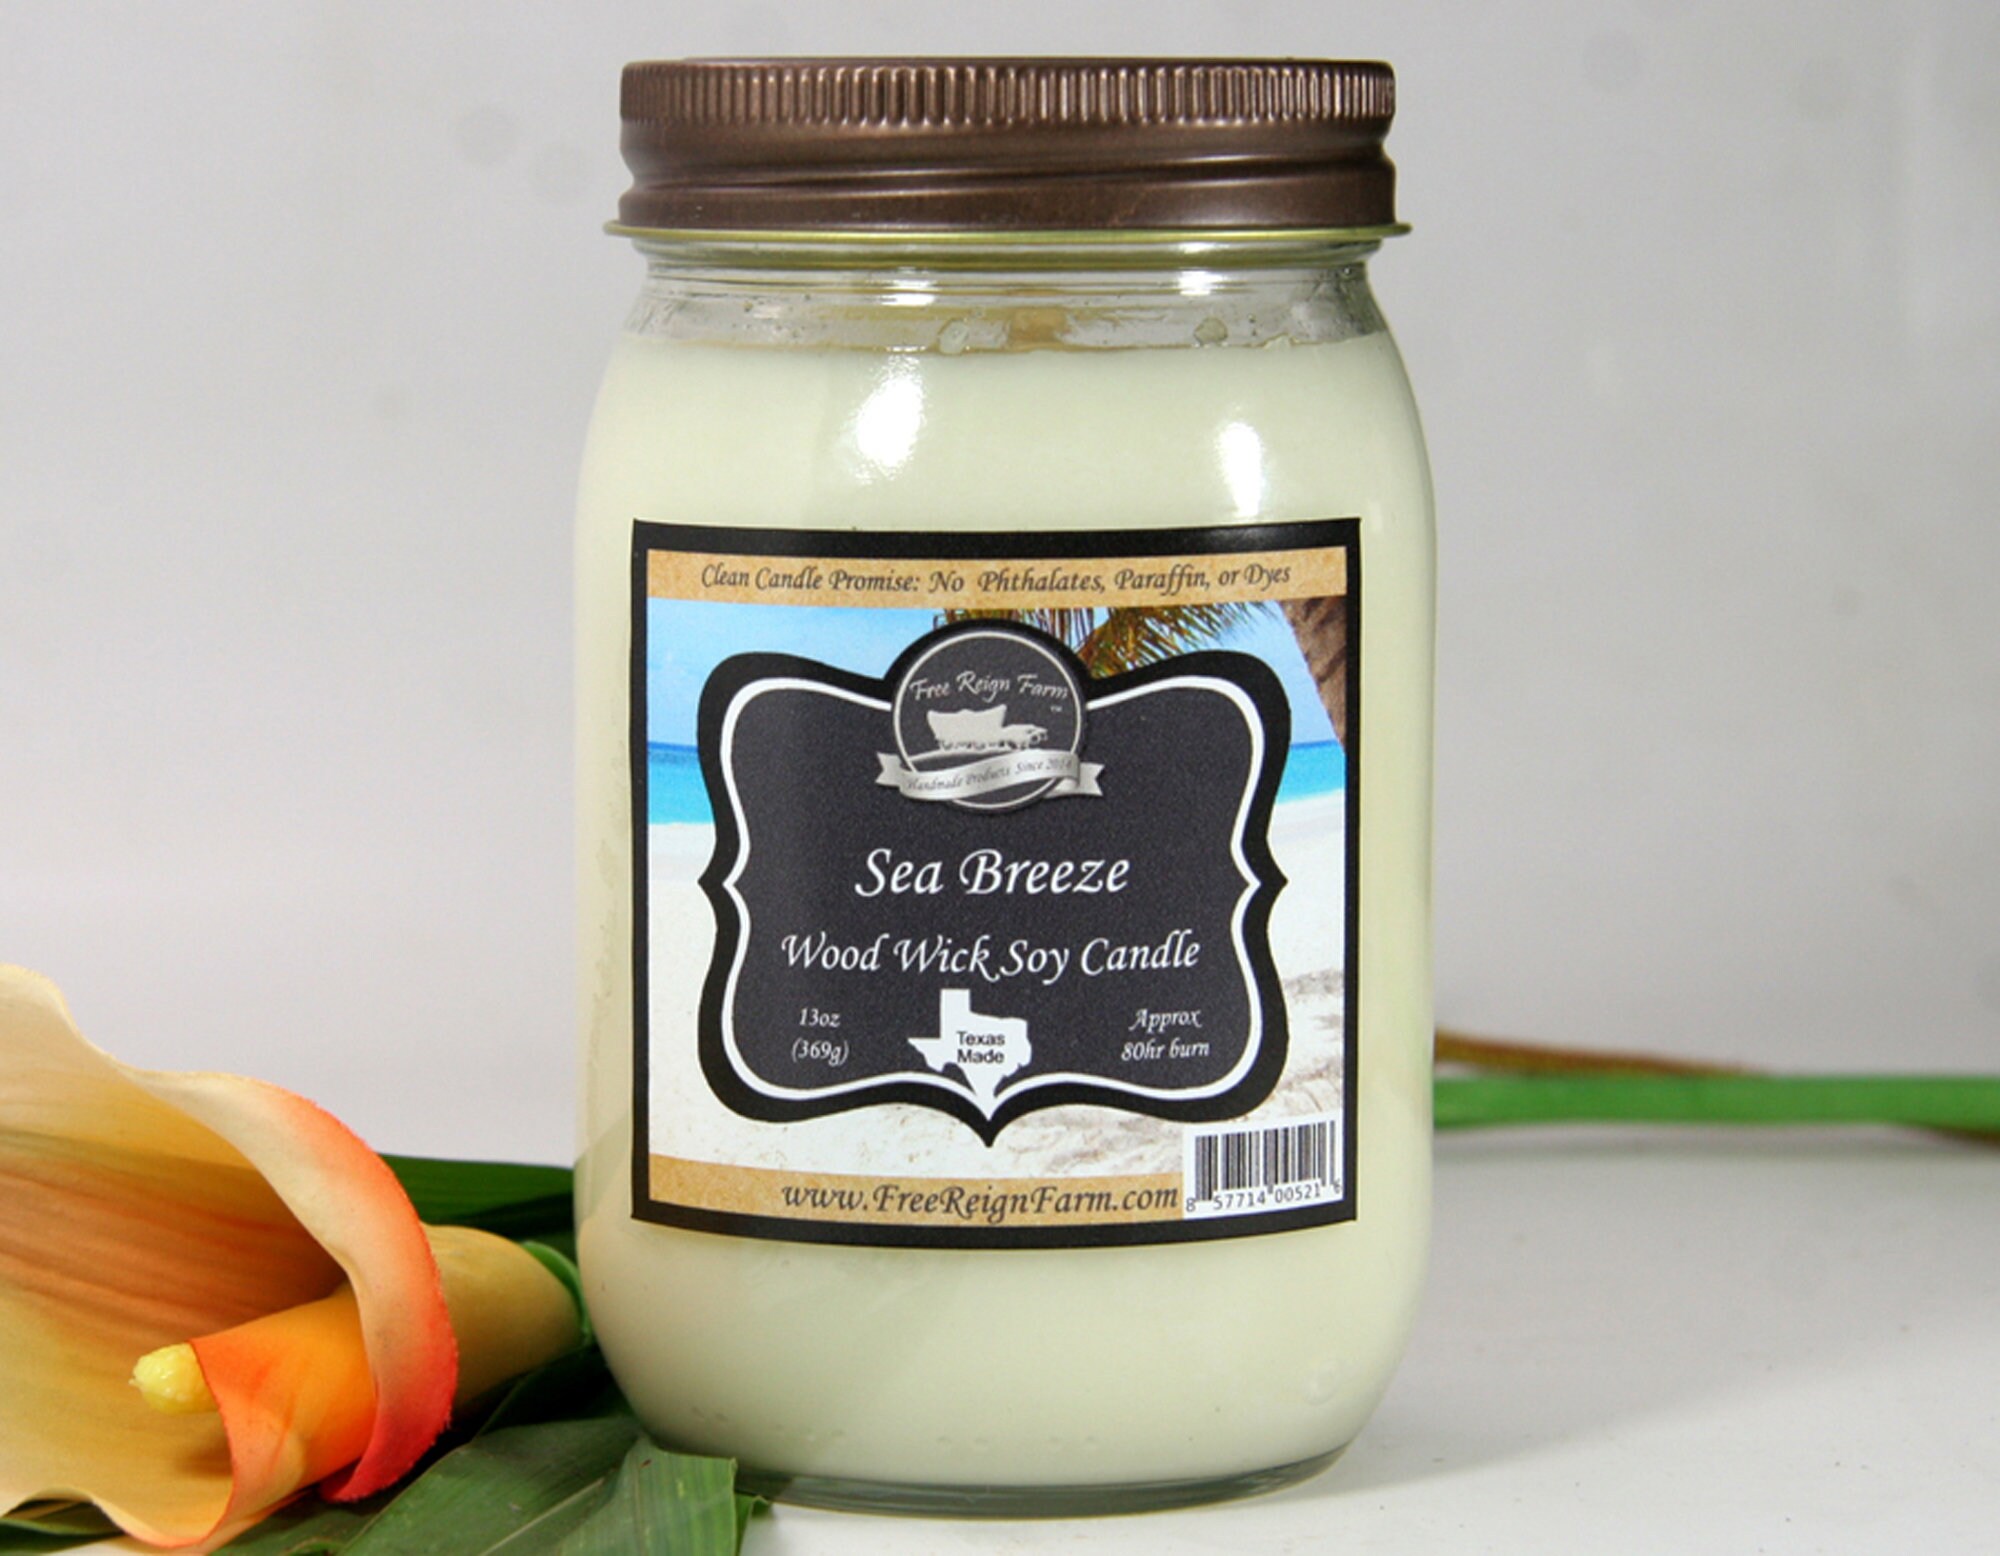 Vanilla Amber Wood Wick Soy Candle